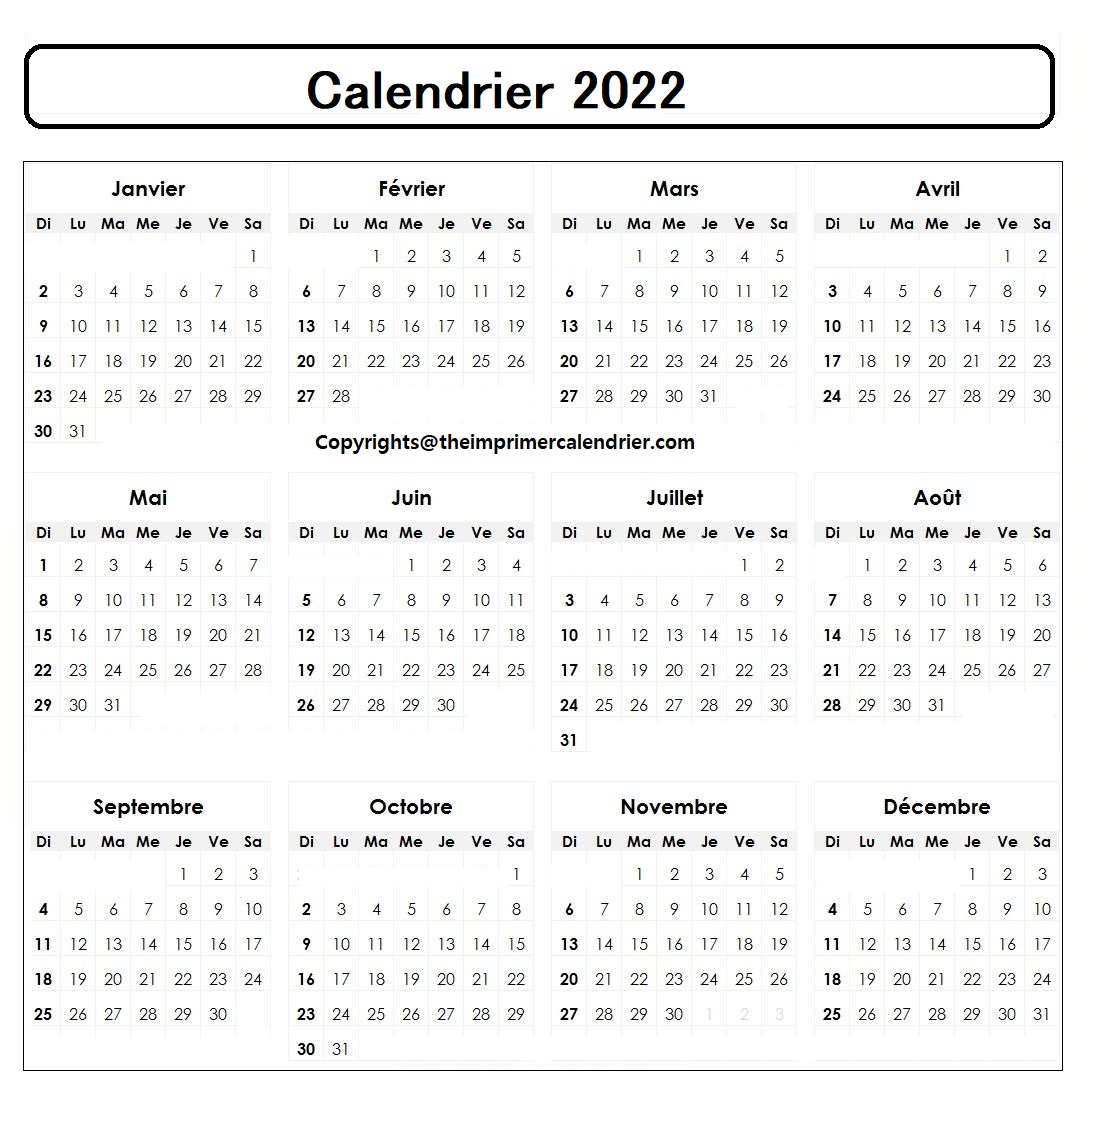 Calendrier 2022 Excel